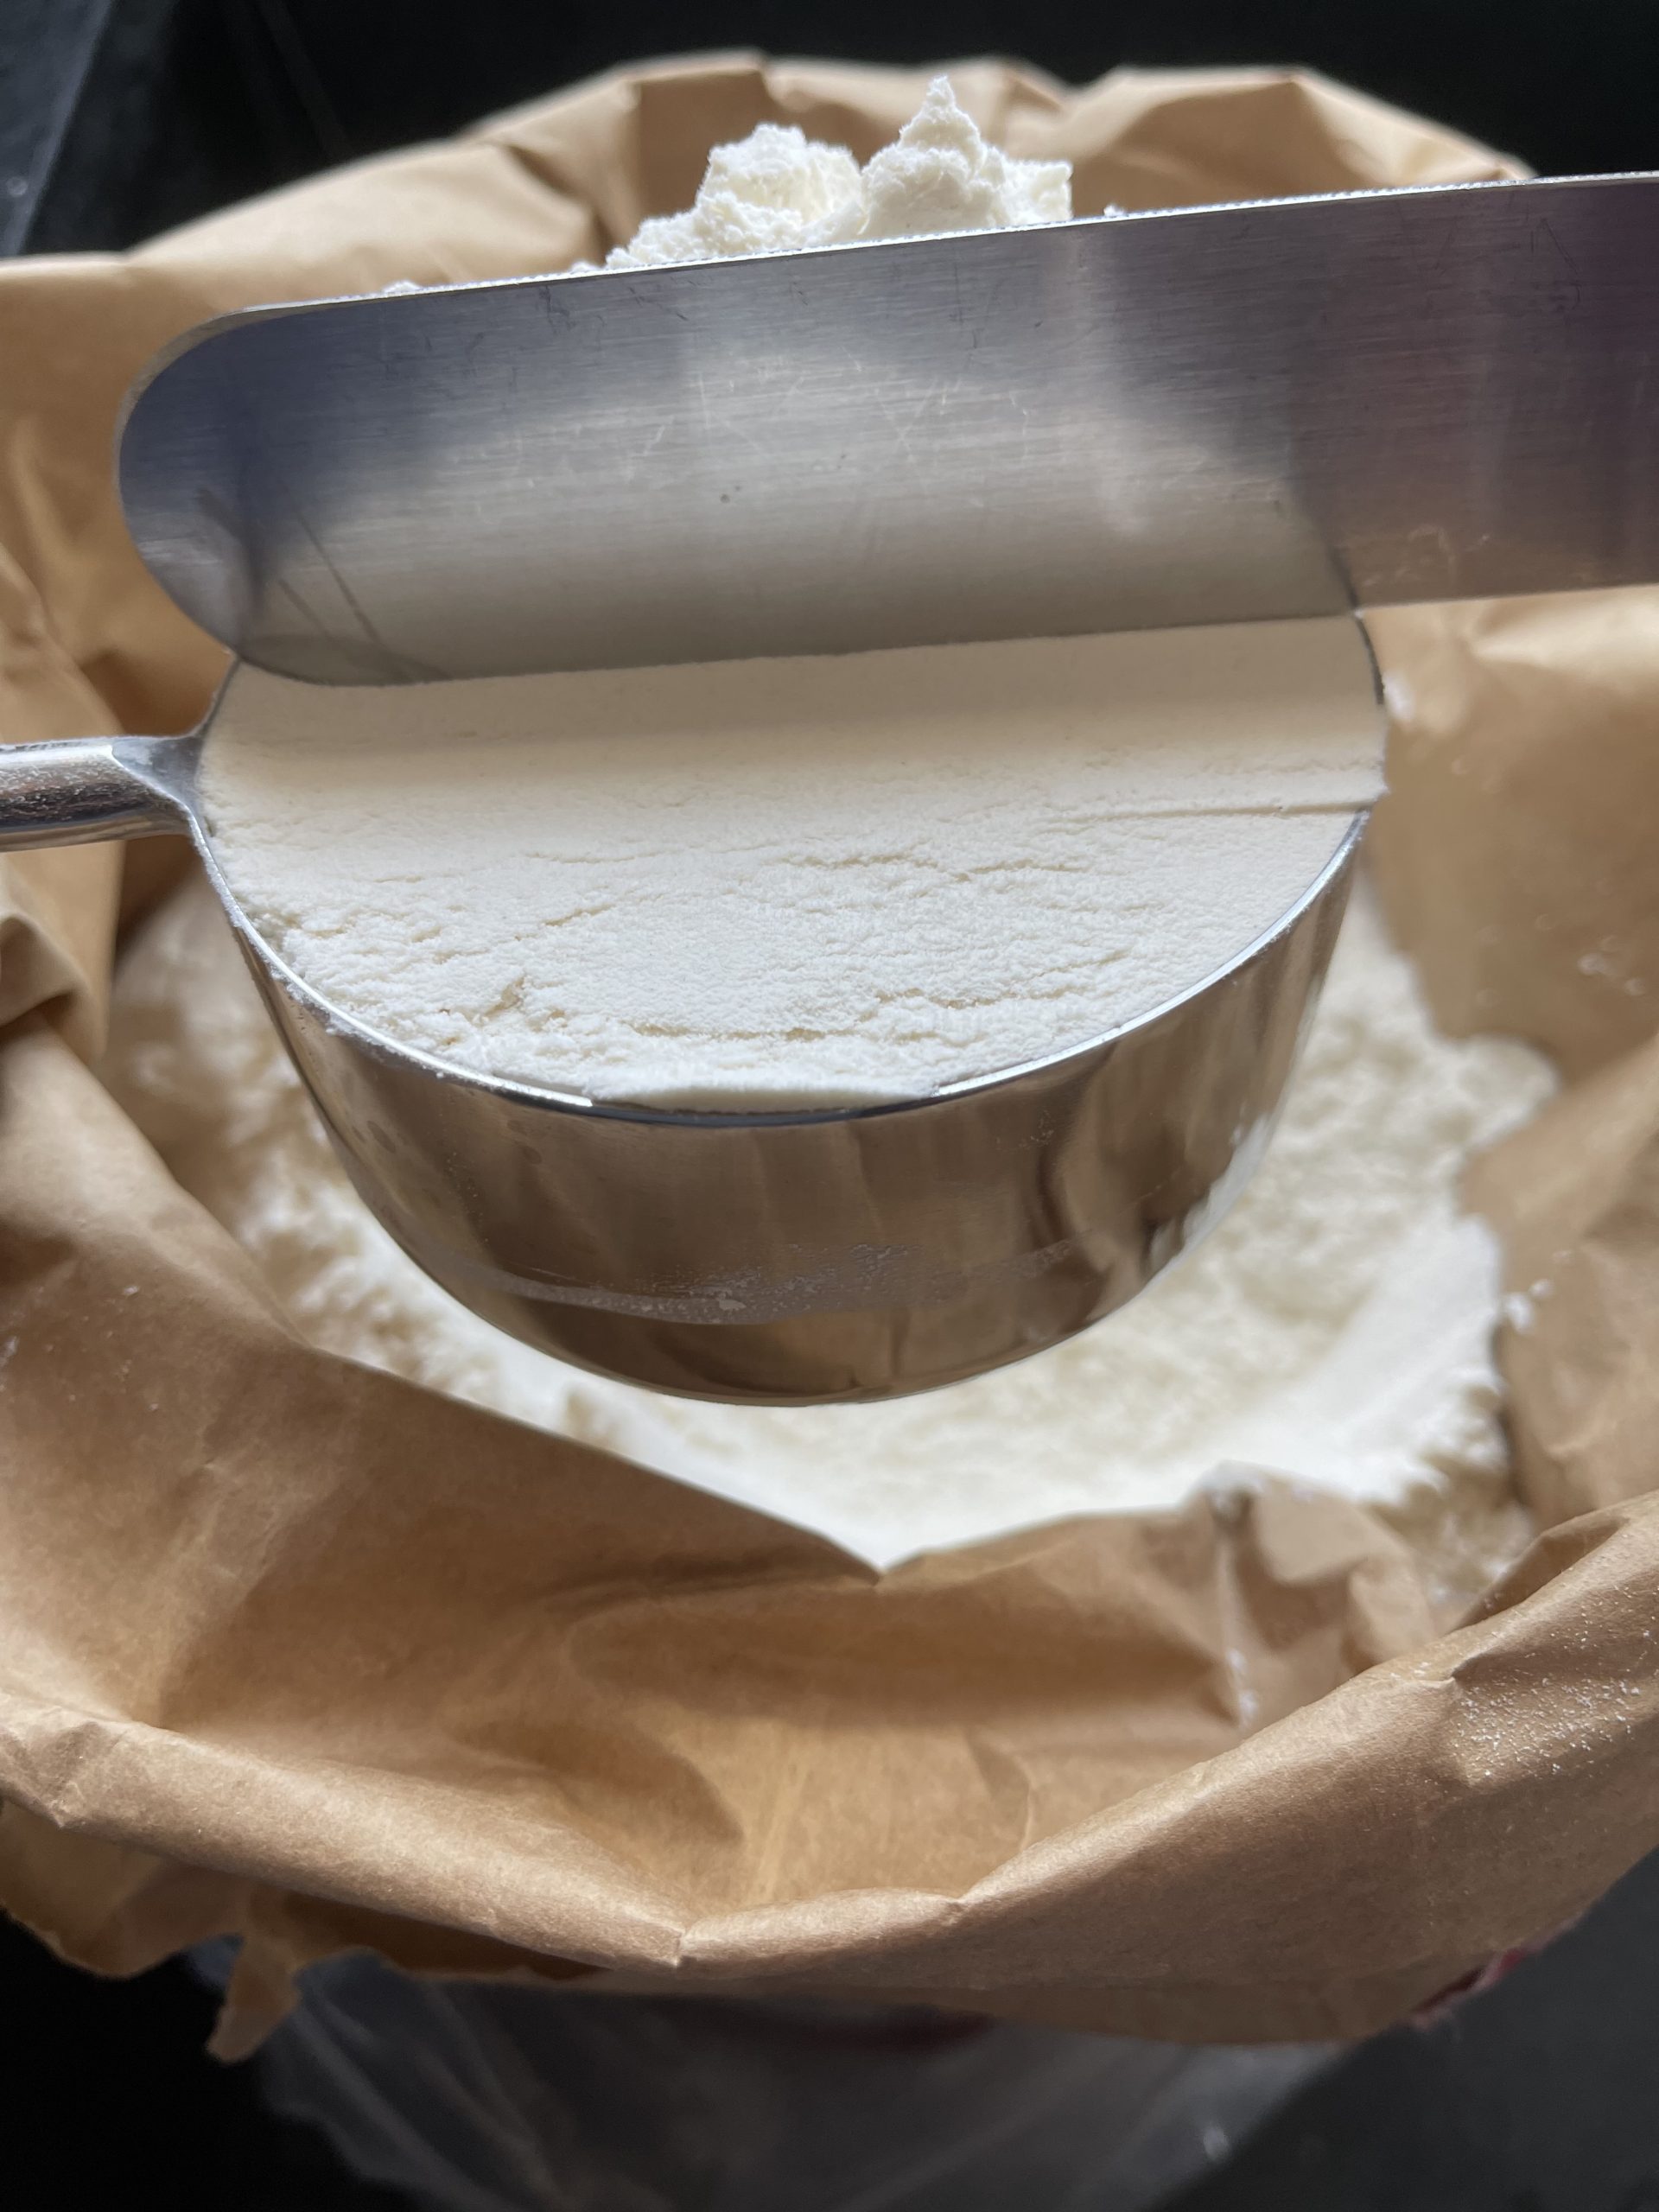 How Do You Measure A Cup Of Flour?